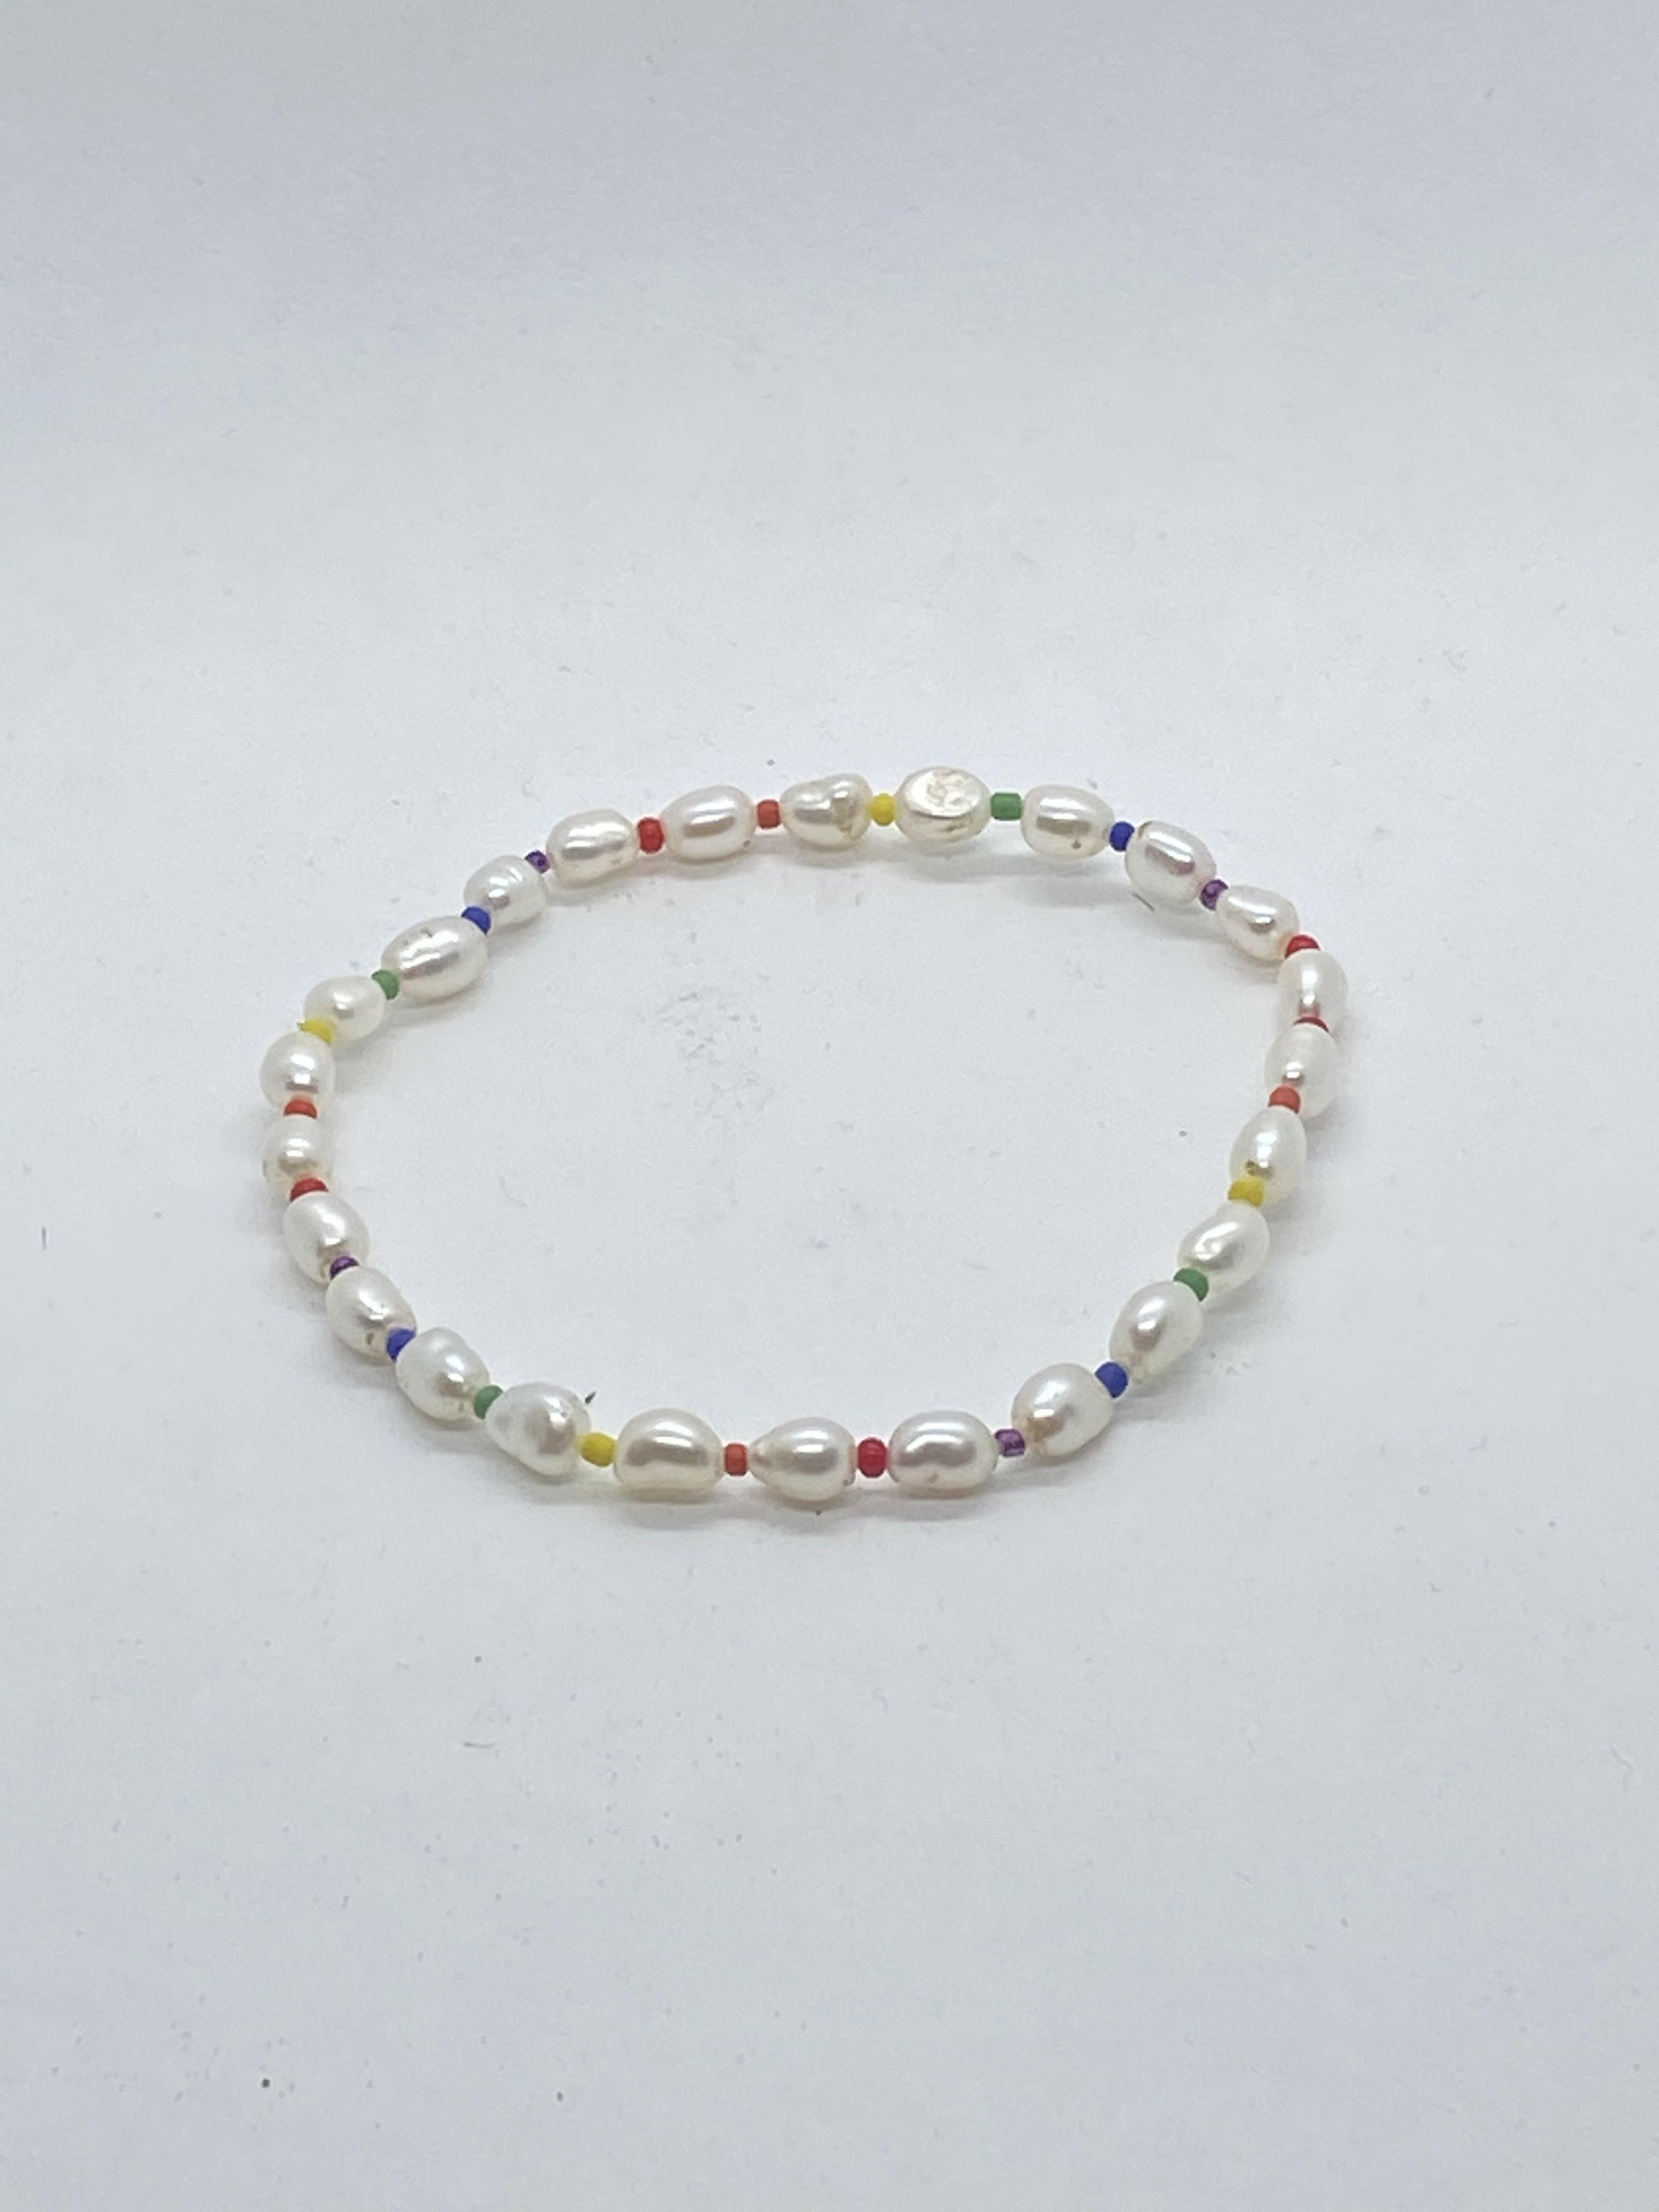 FRESH WATER PEARL ANKLET WITH RAINBOW BEADS - bobbie carr